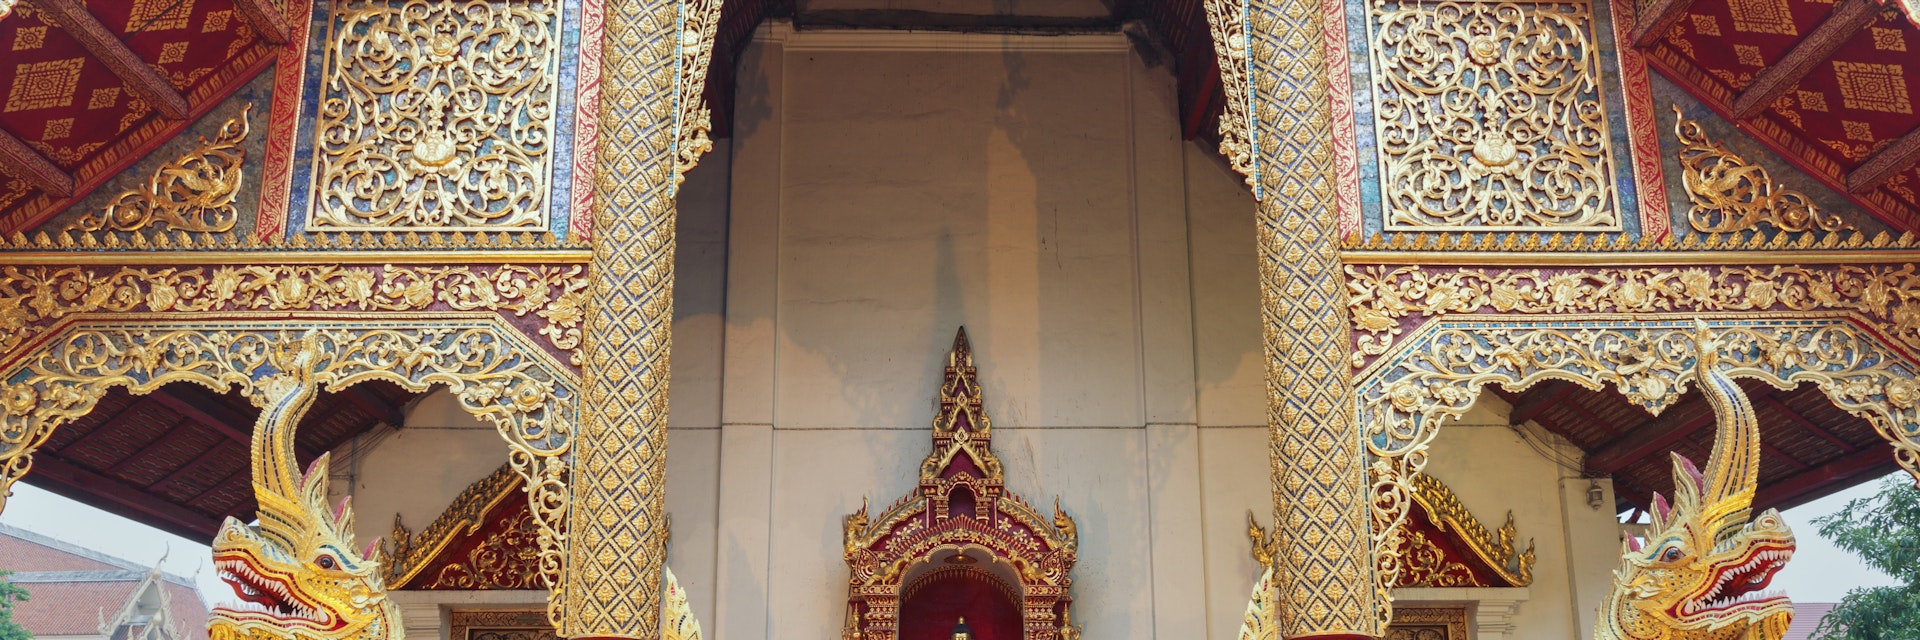 Asia, Thailand, Chiang Mai Province, Wat Phra Singh temple. (Photo by: JTB Photo/UIG via Getty Images)